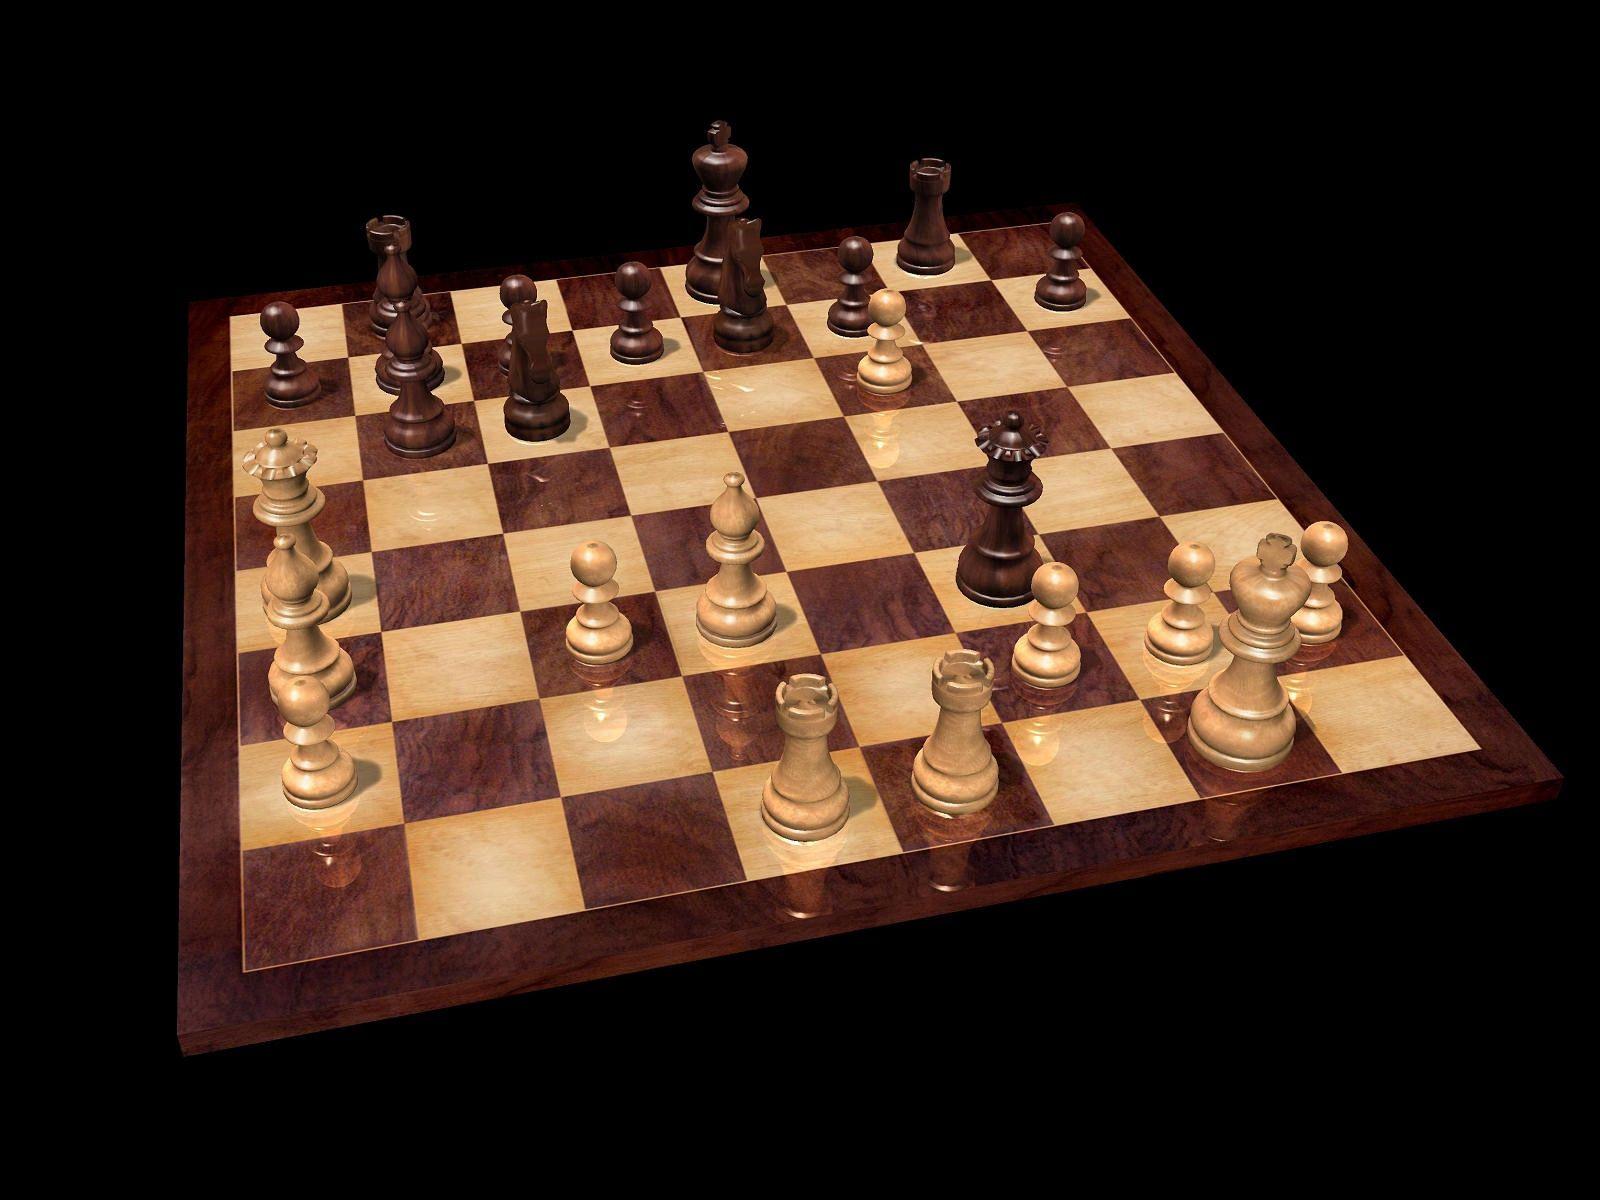 Download wallpaper 1600x1200 chess, board, game, party, figures HD